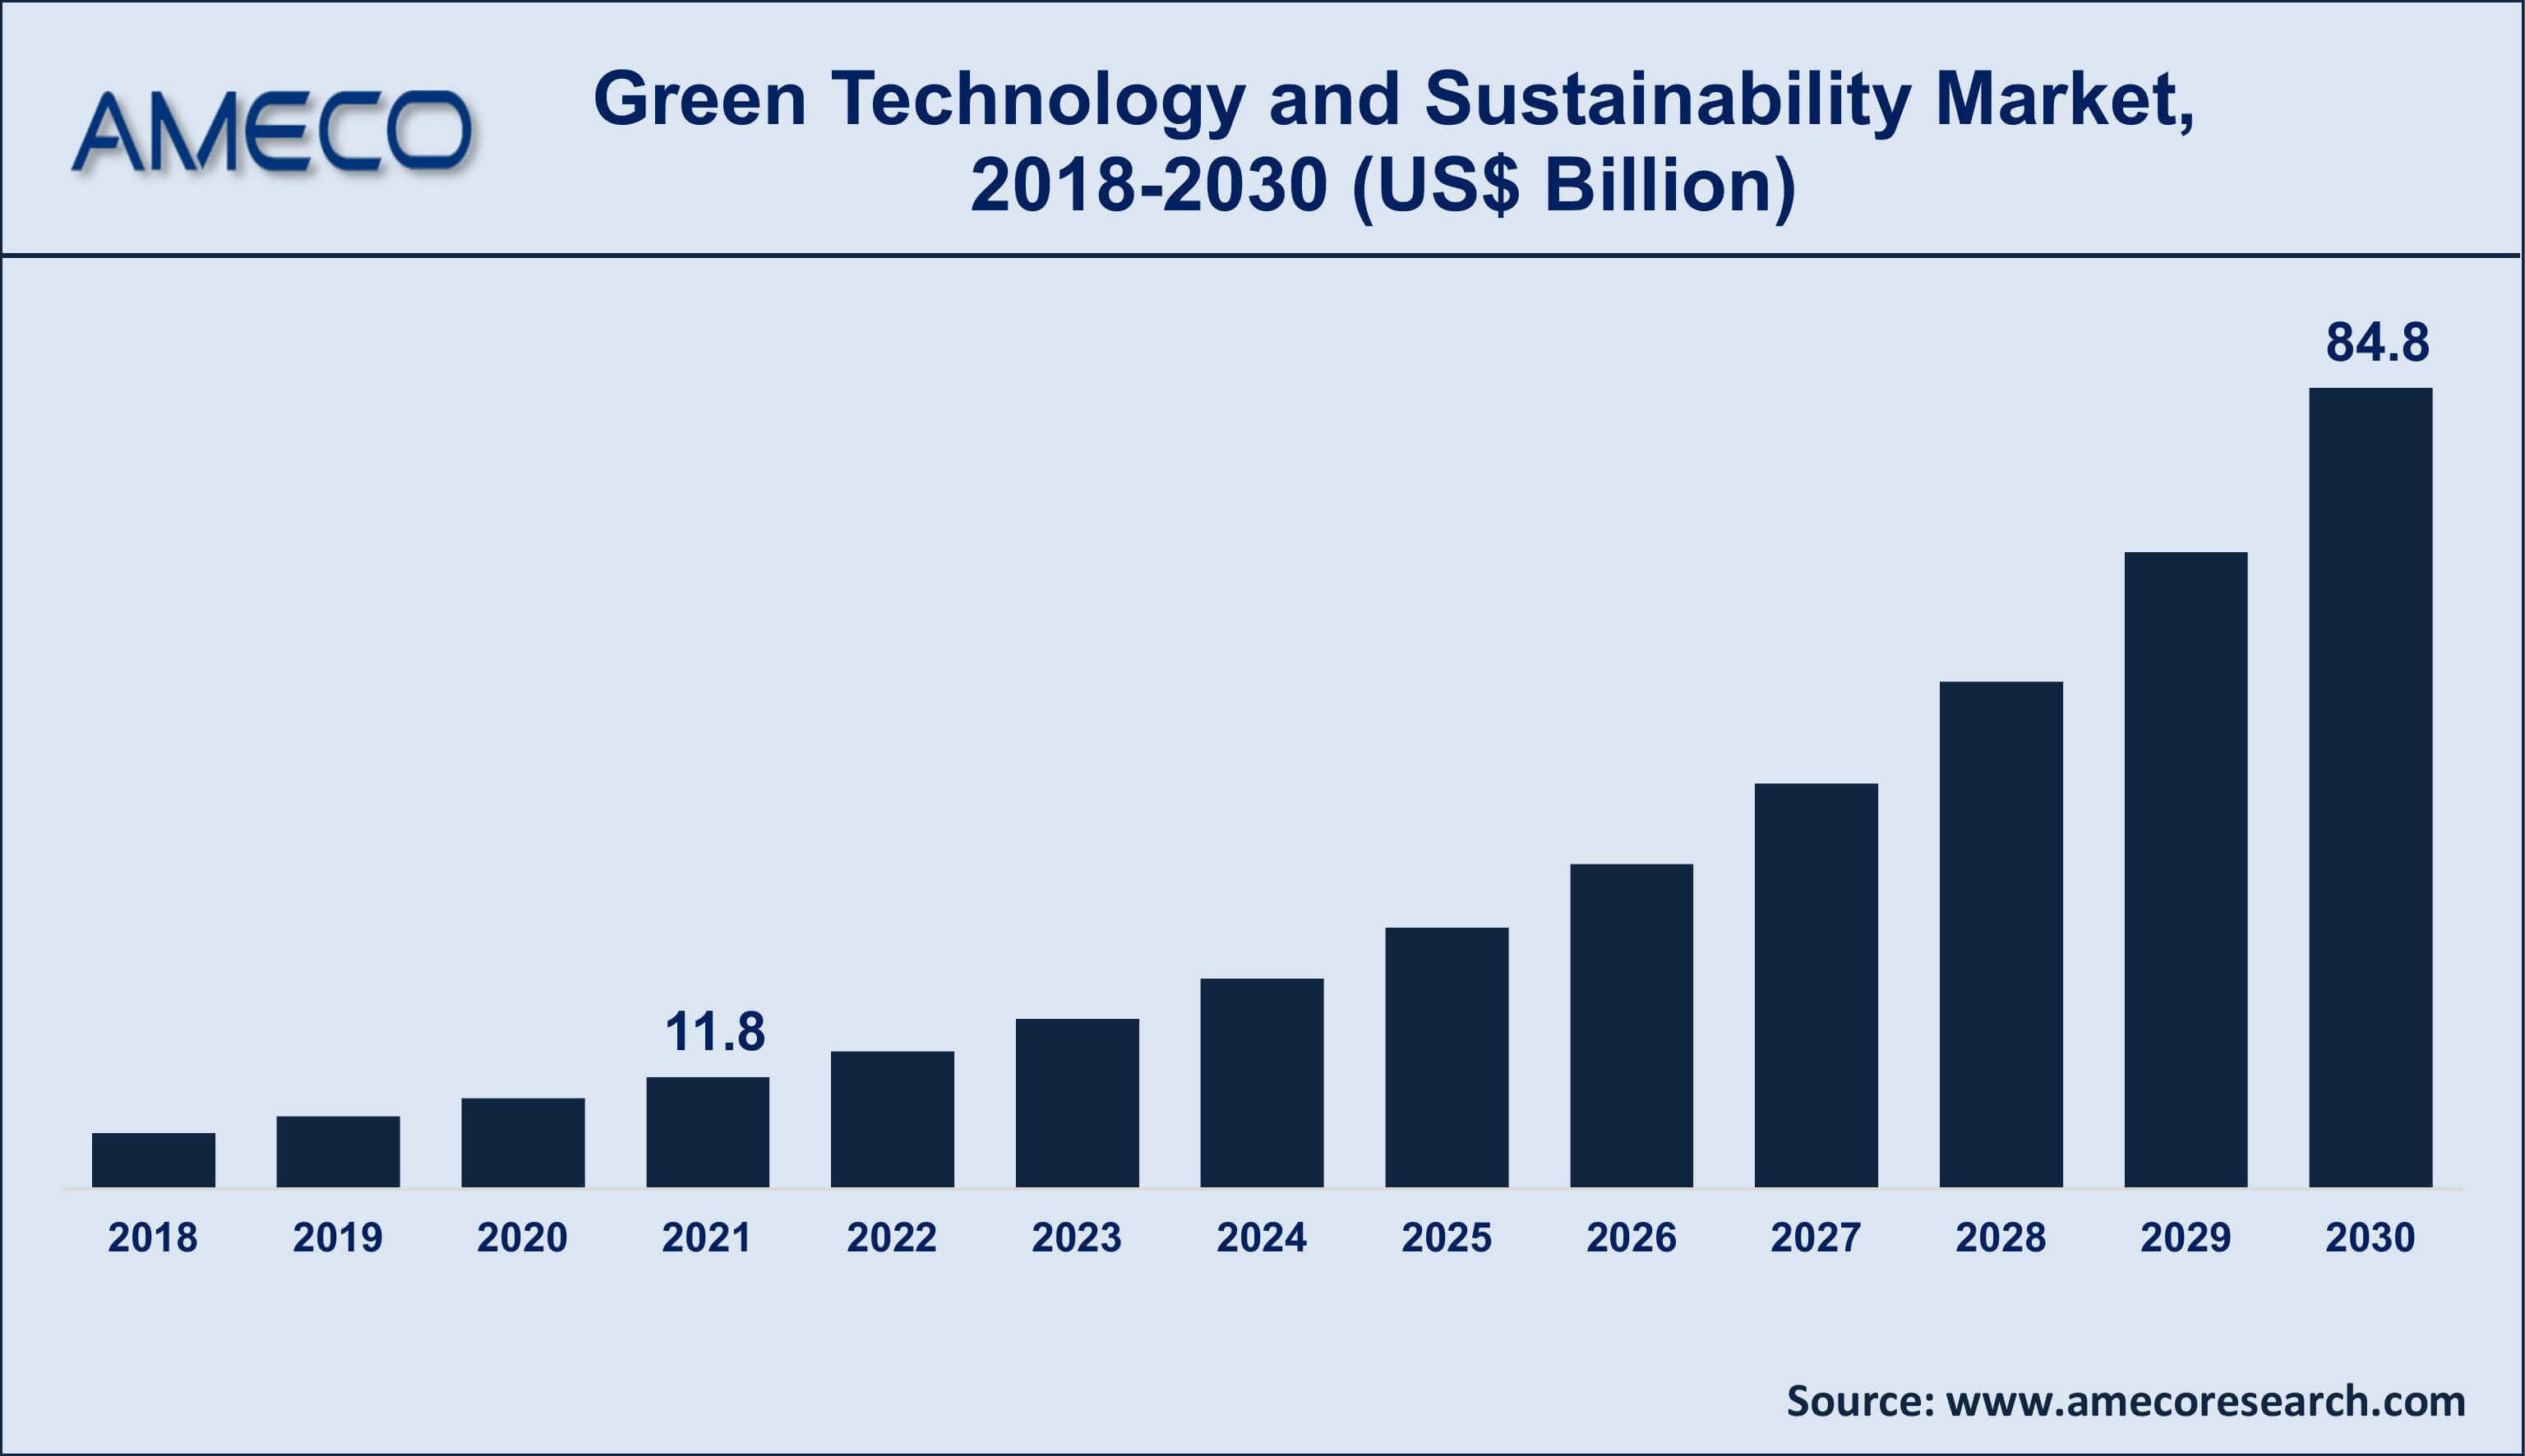 Green Technology and Sustainability Market Dynamics